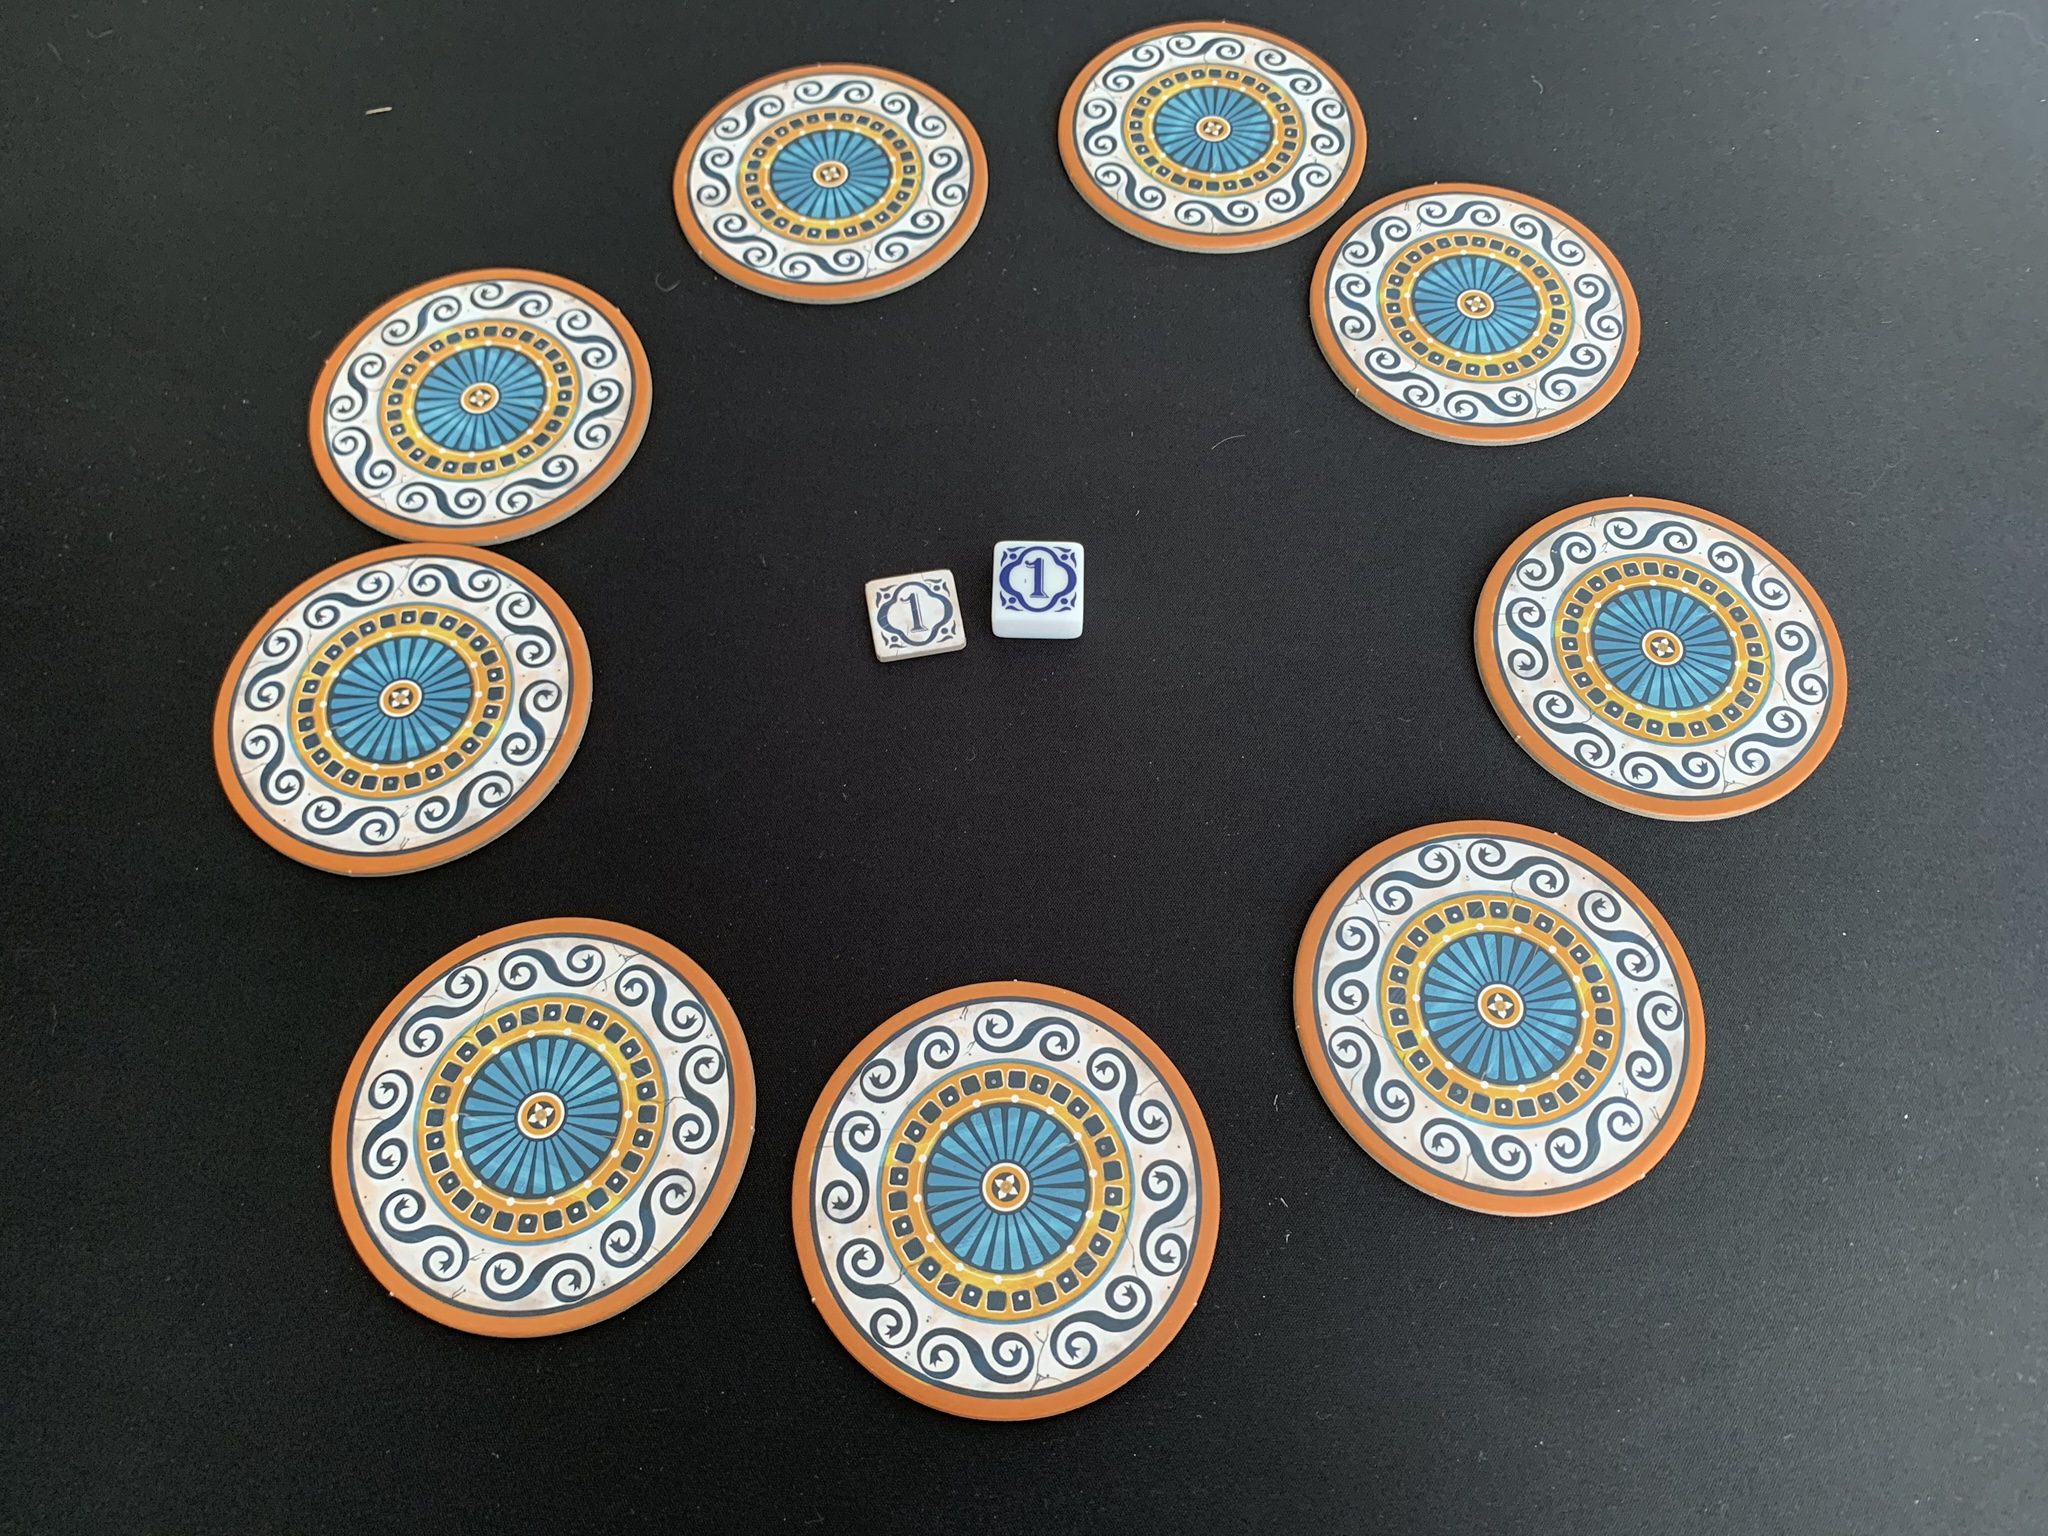 Factory tiles and the 2 versions of the 1st player token